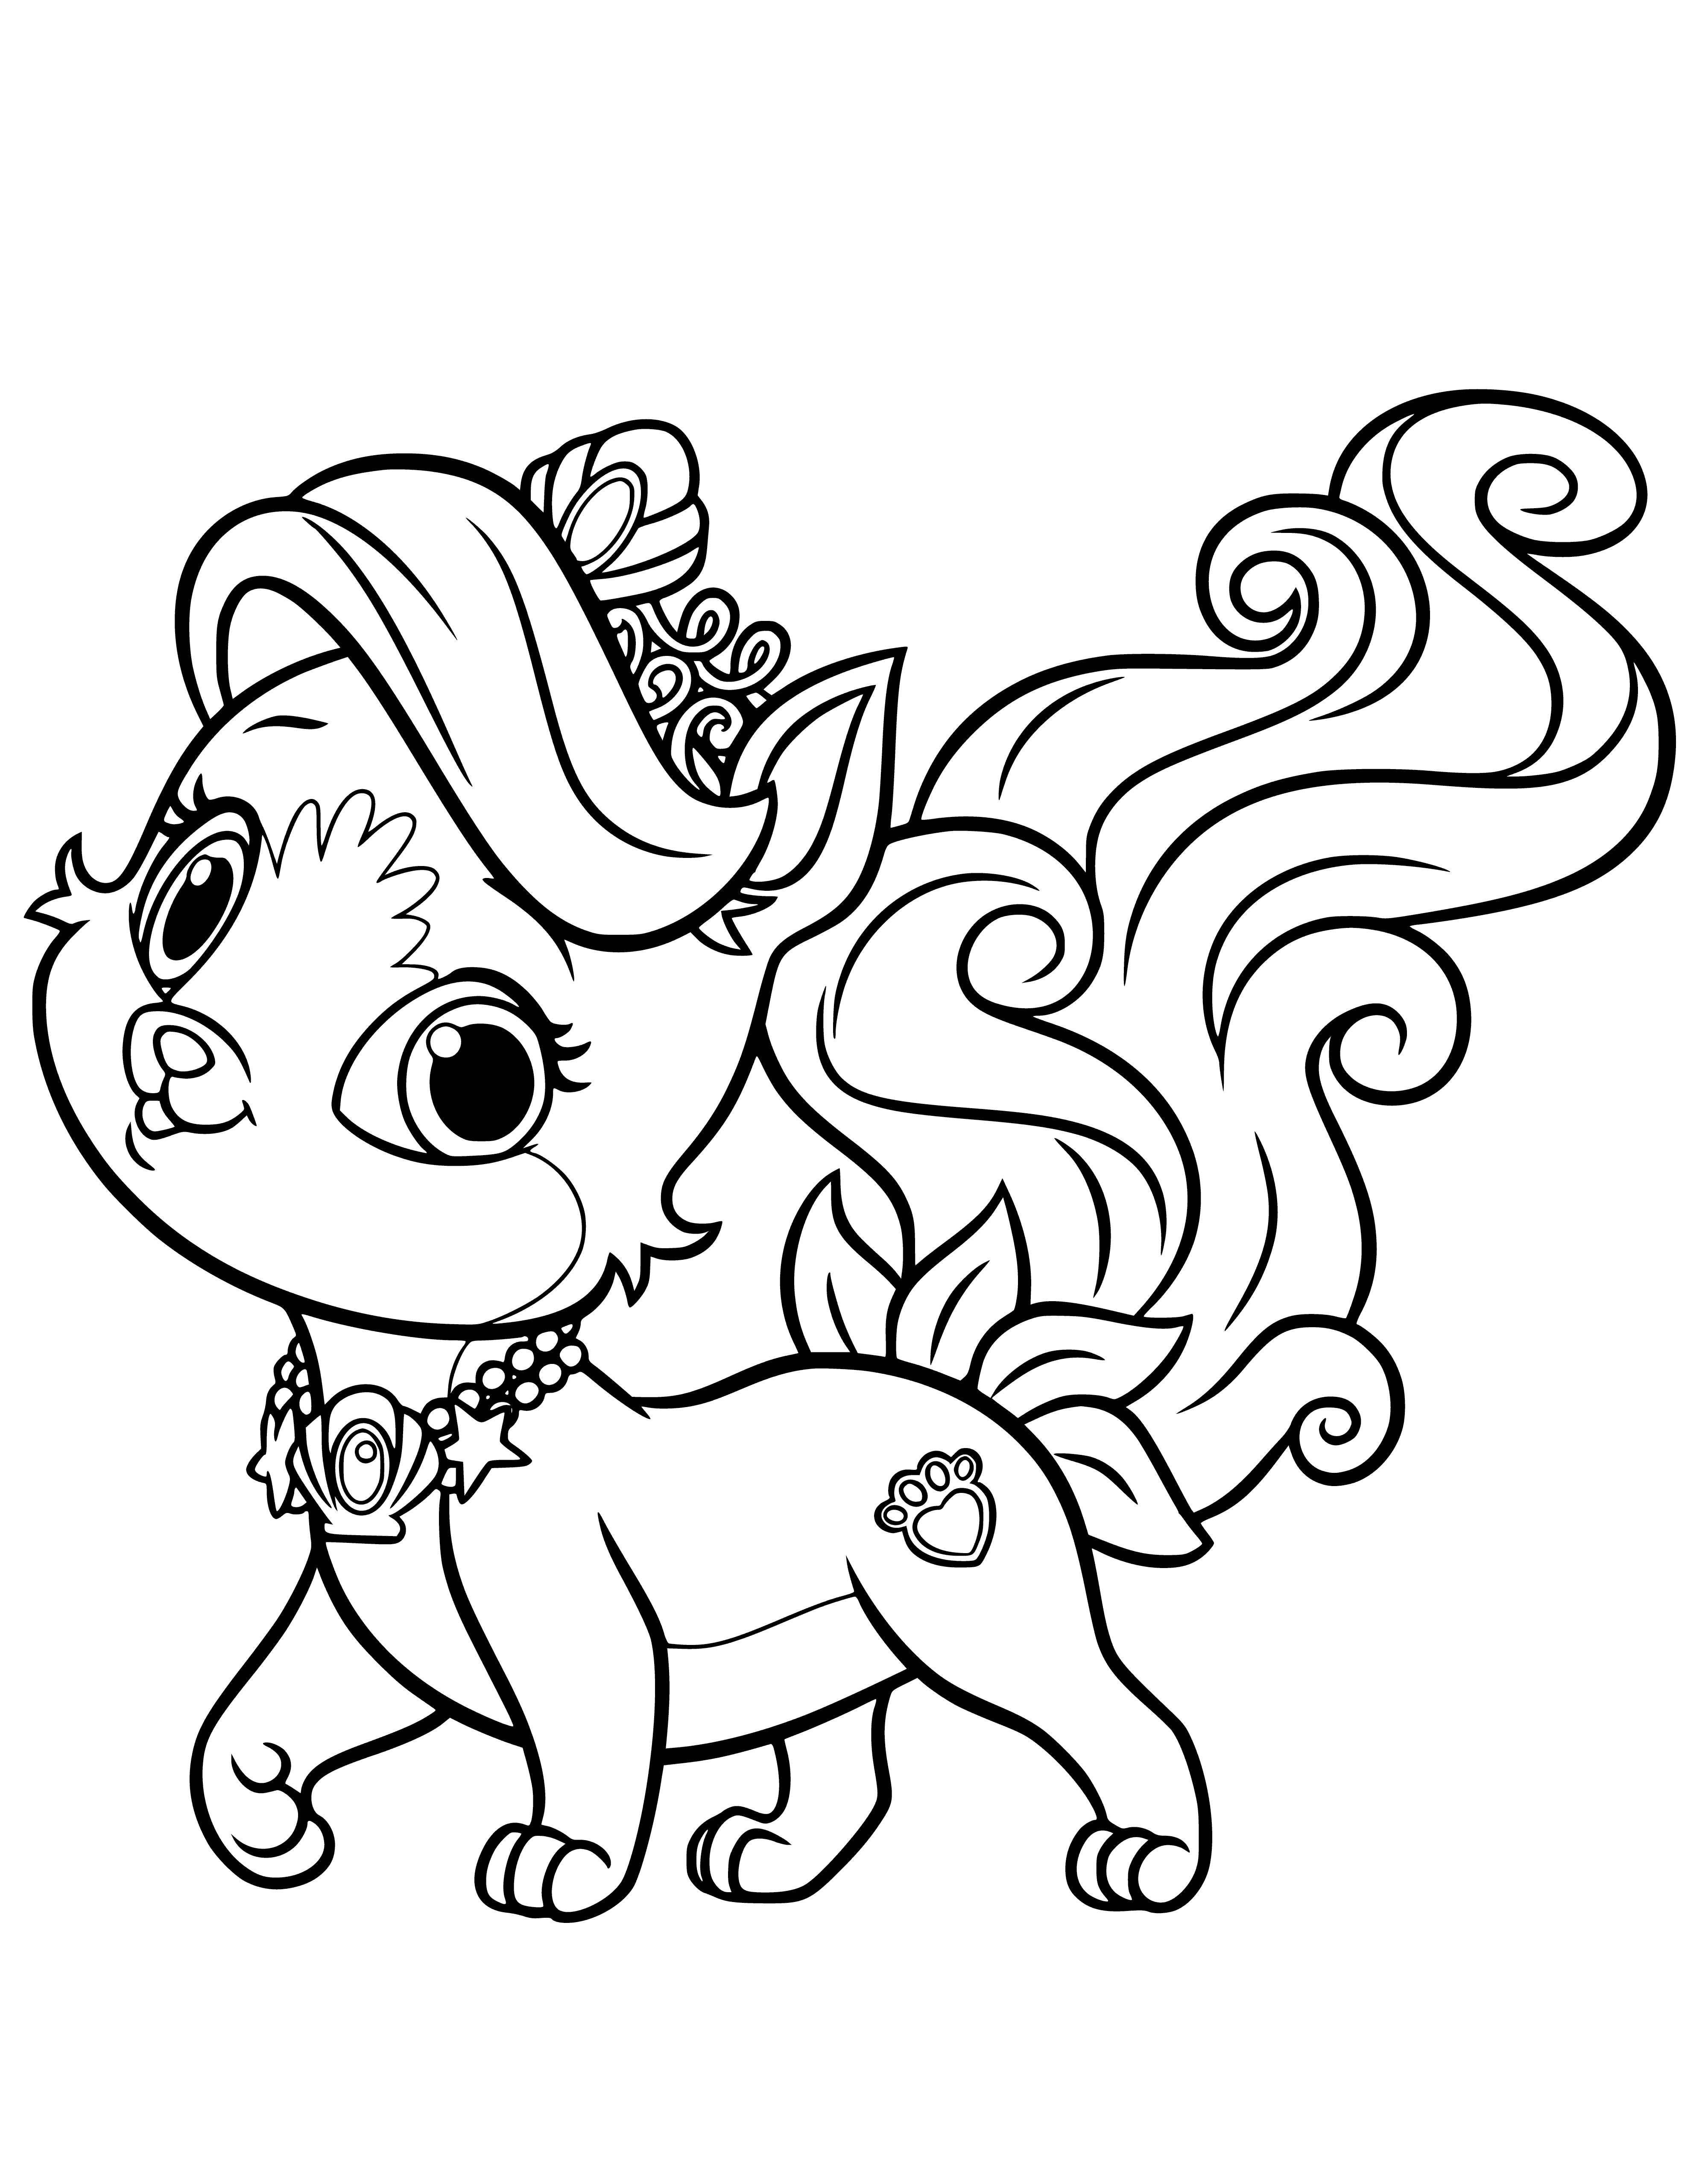 coloring page: Kitten Zhemchuzhinka and Pet Ariel are two royal pets, each wearing a jeweled collar and gold crown.